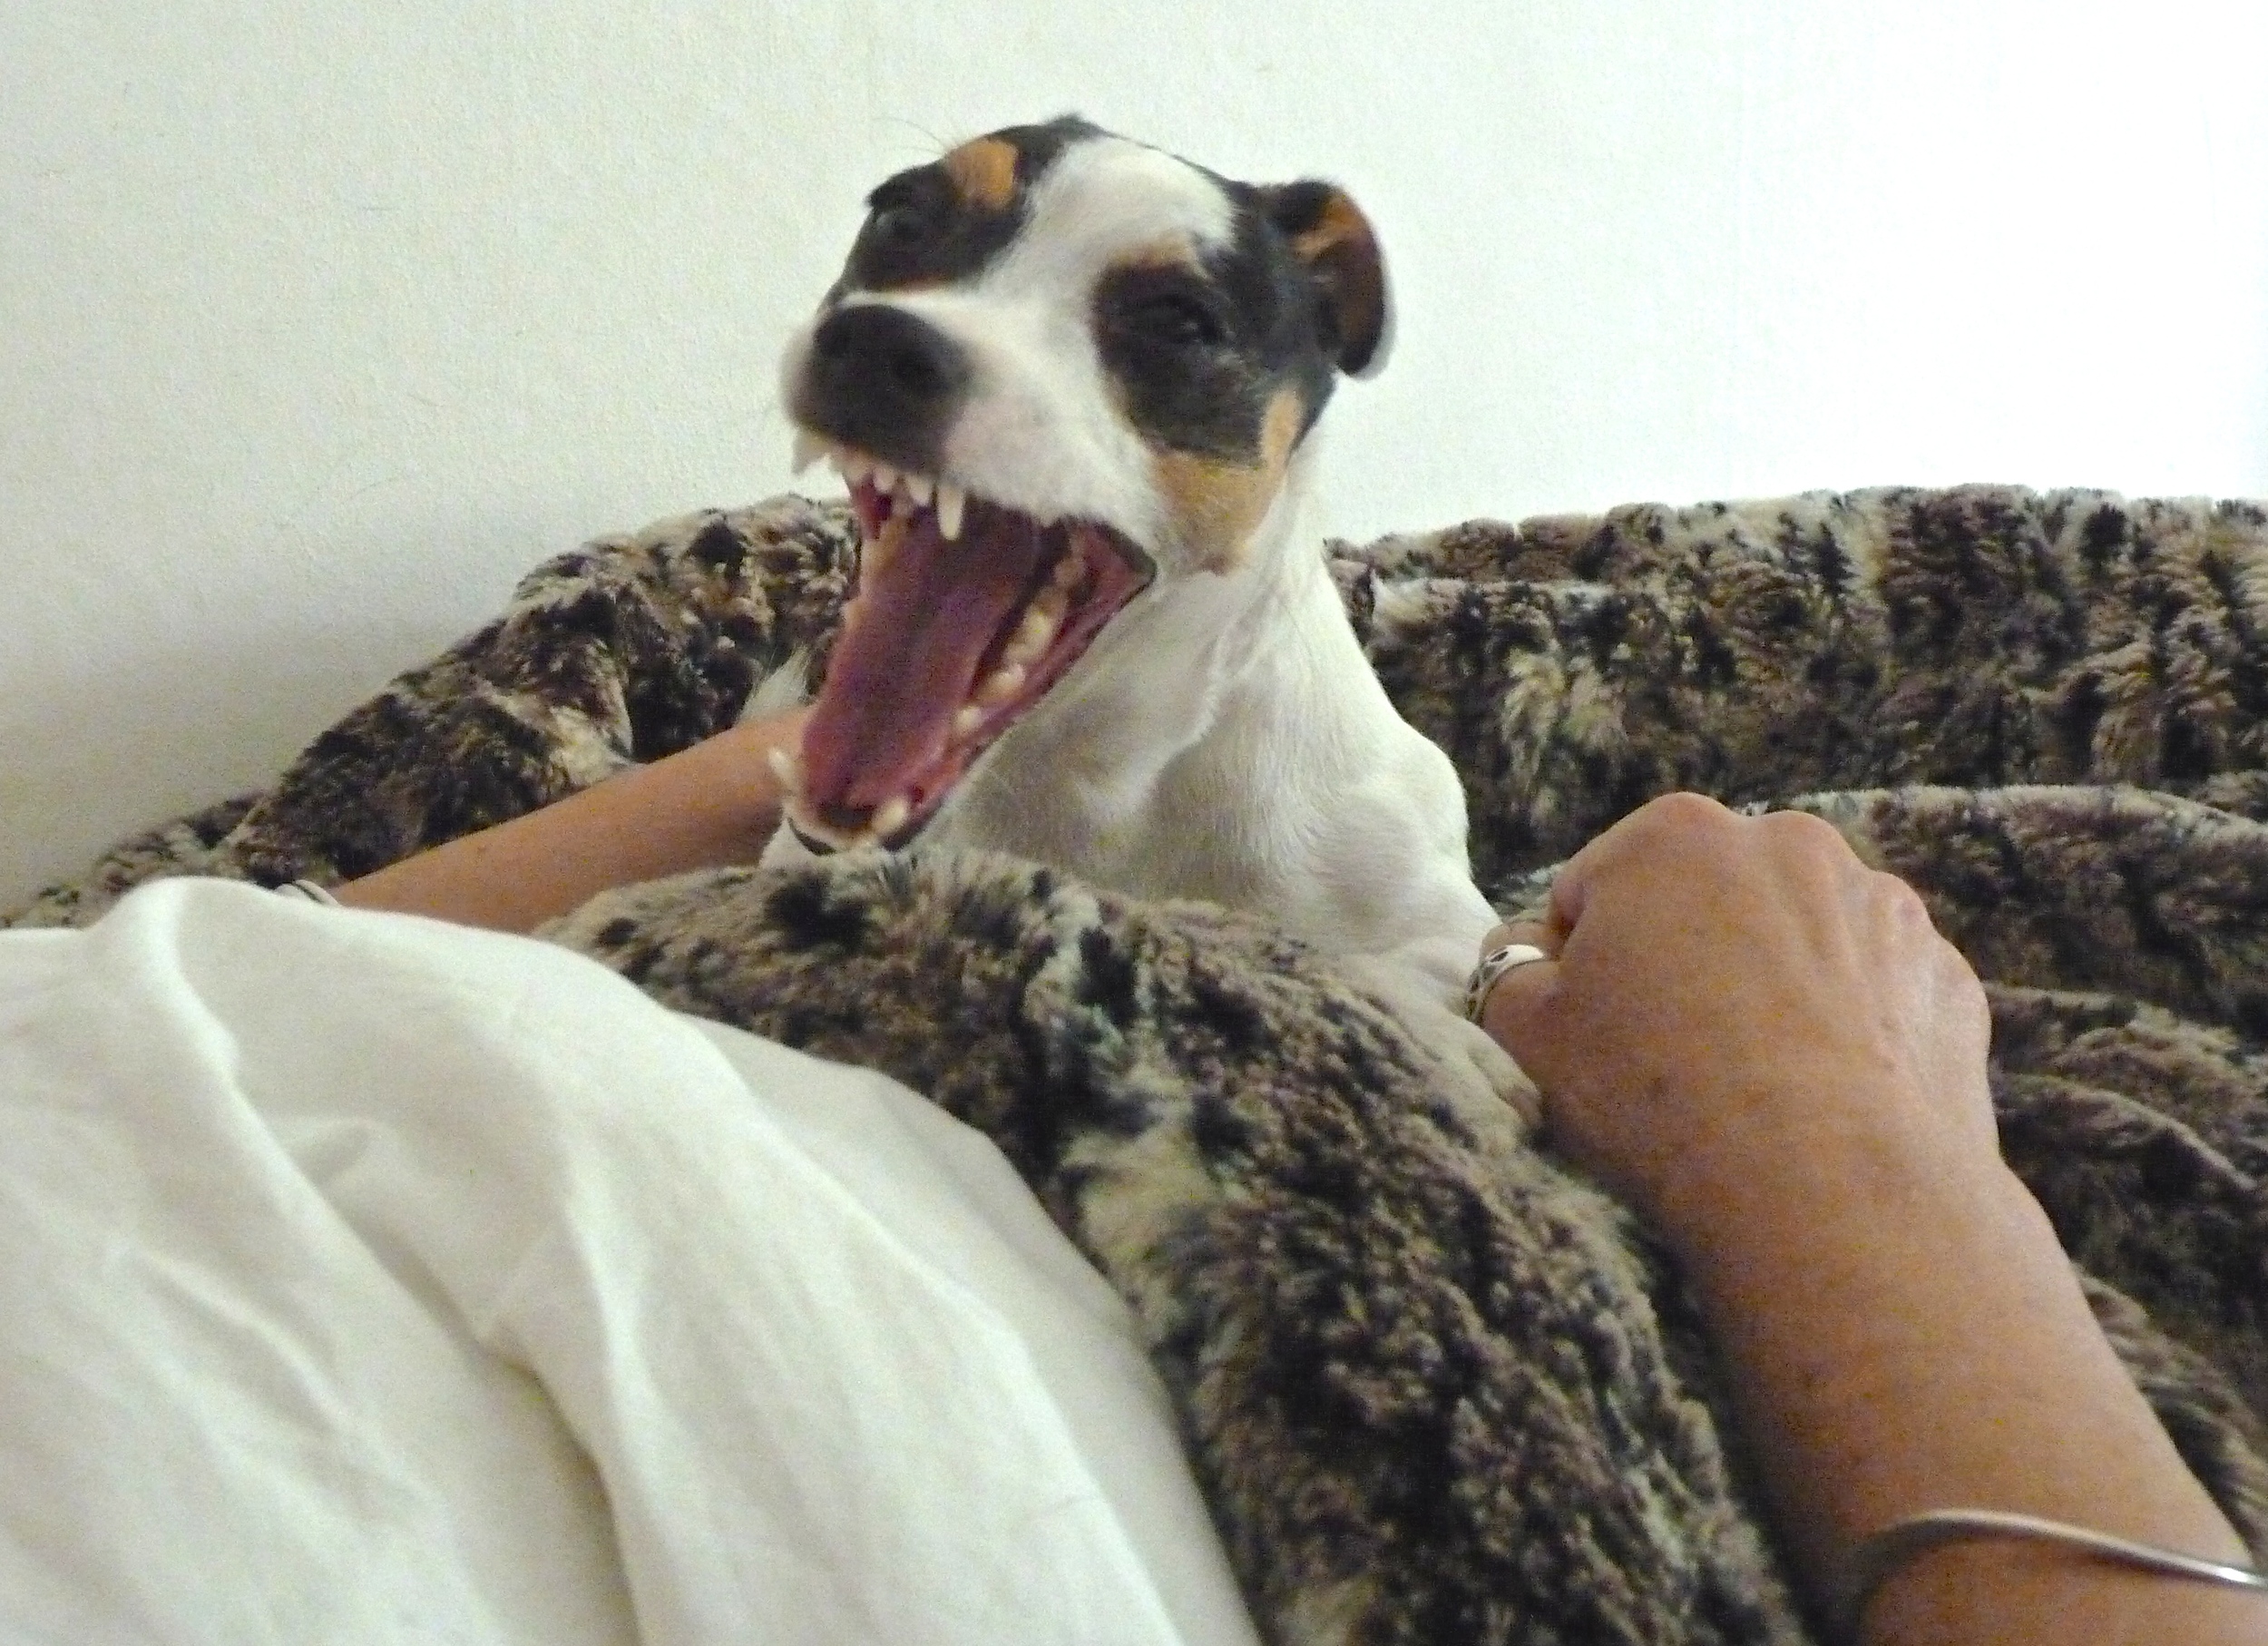  Look how sharp my teeth are! Don't be afraid: I'm only yawning. 